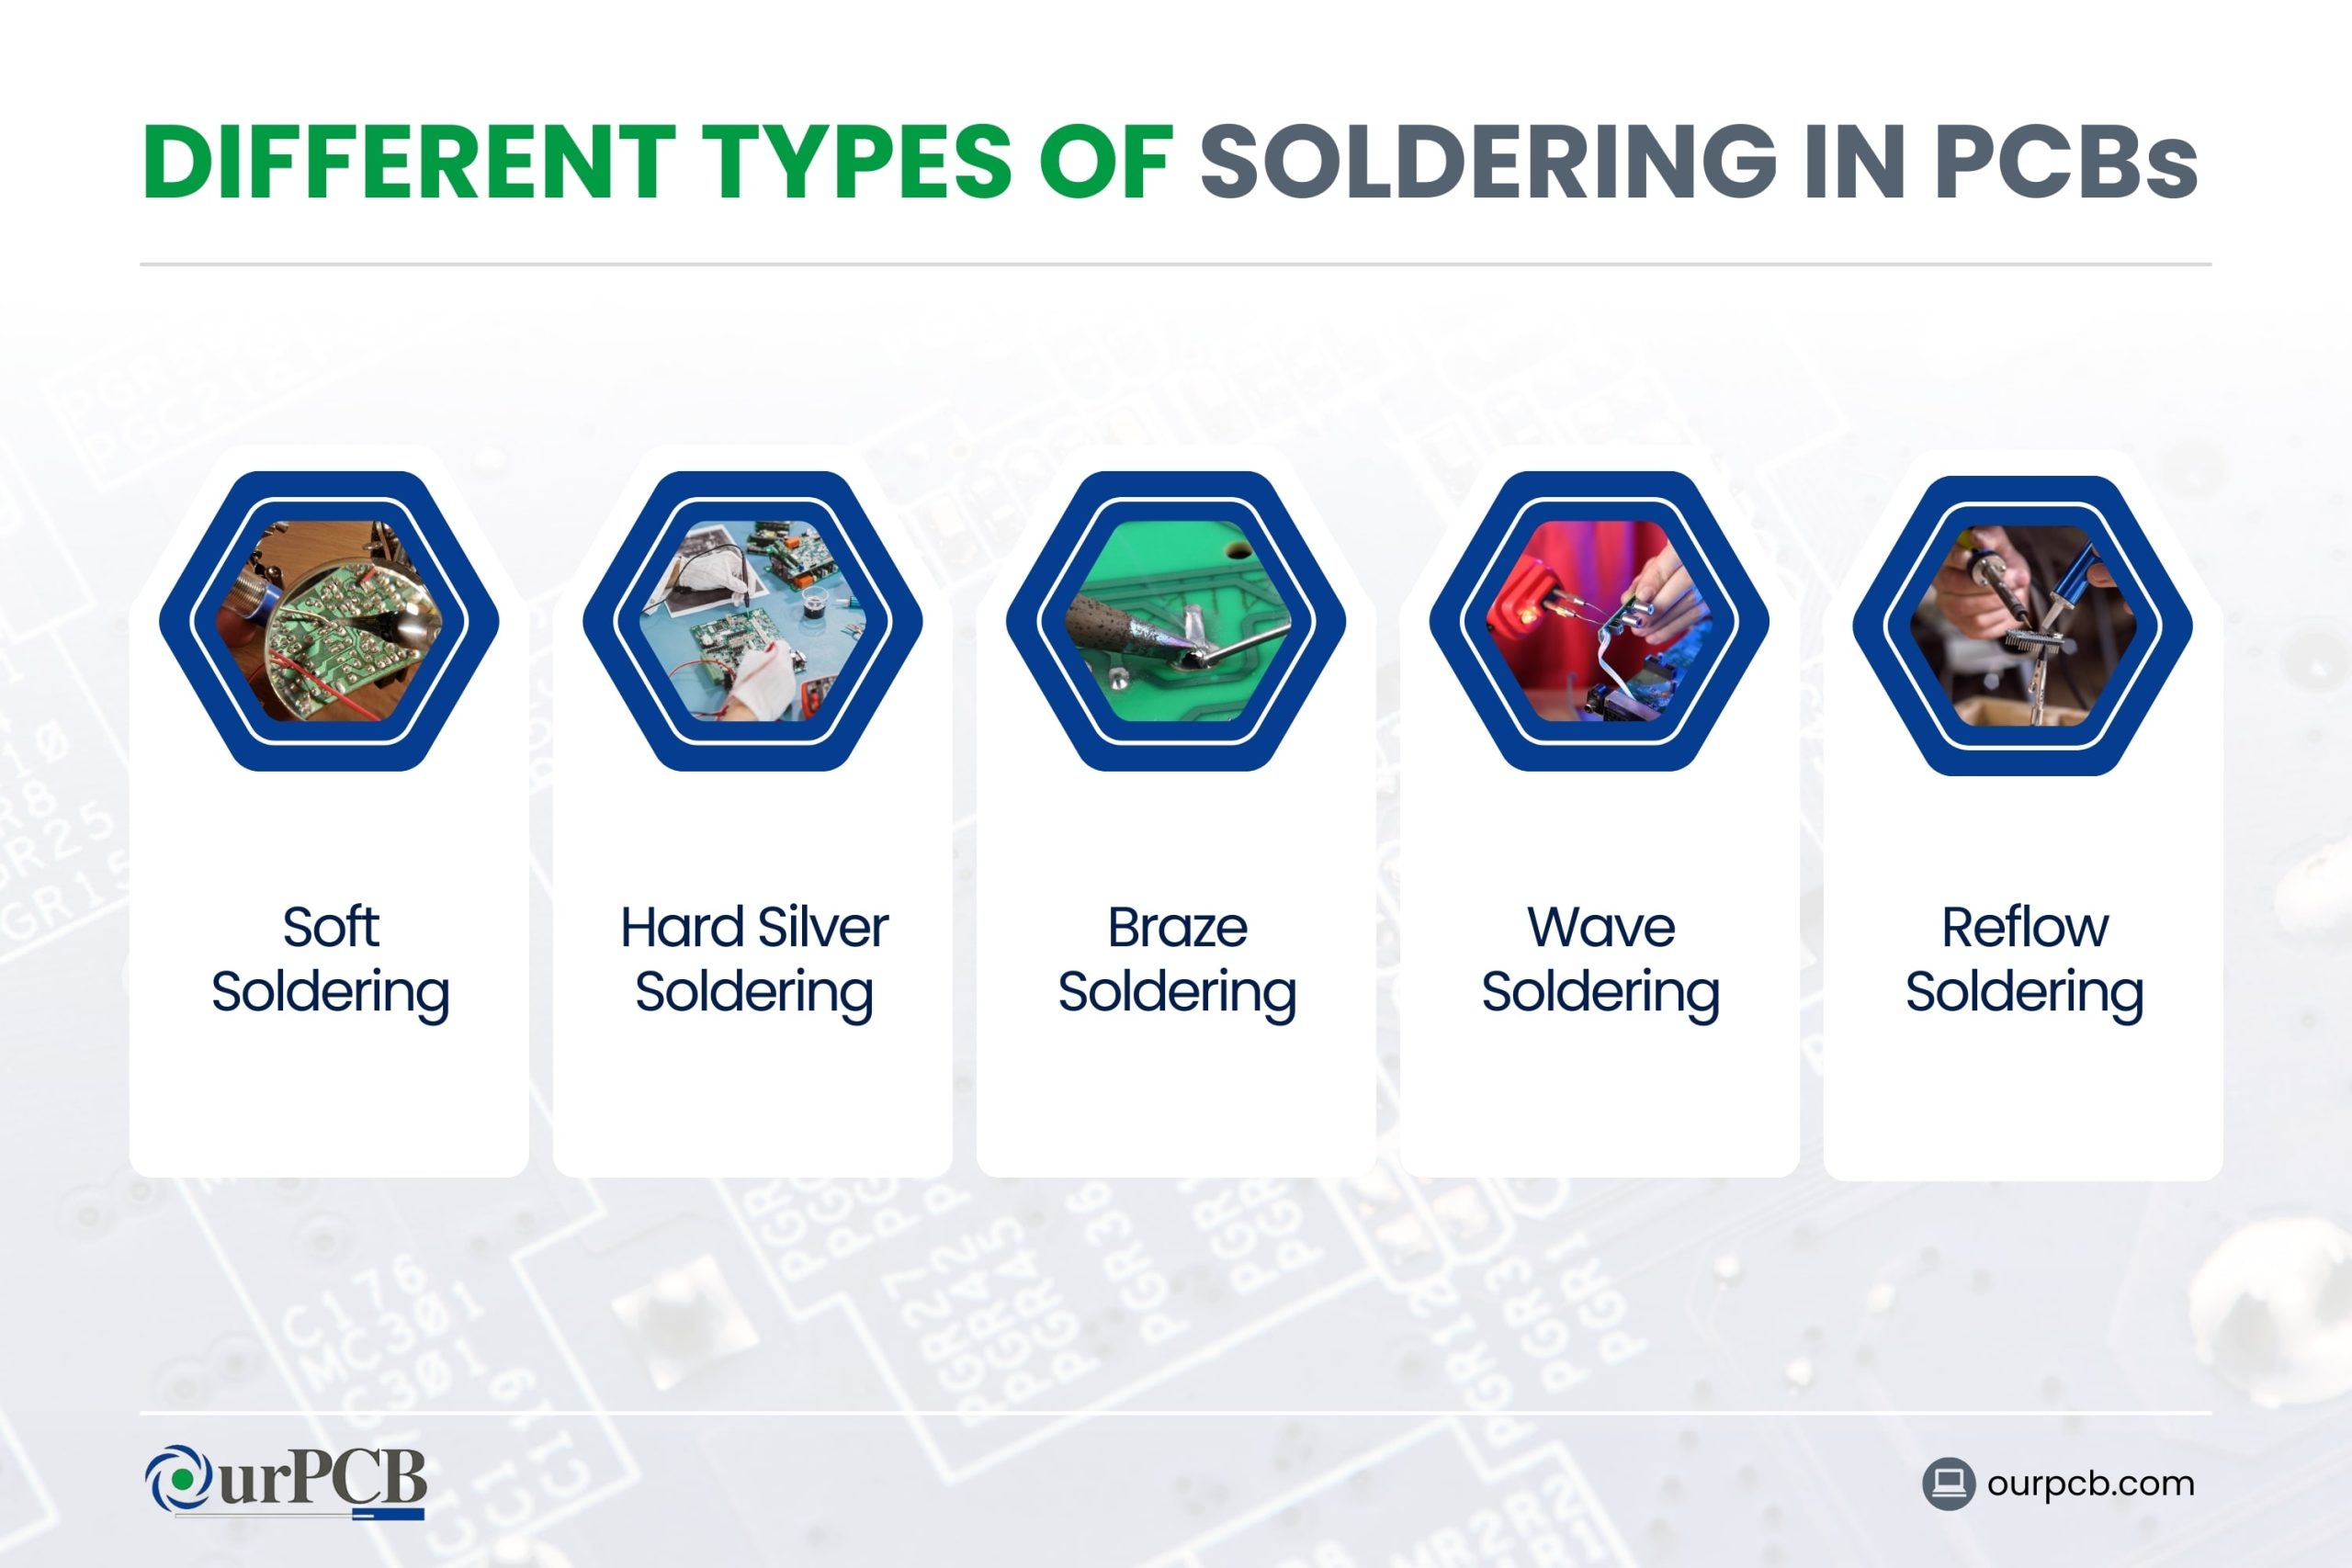 Different Types of Soldering with PCBs